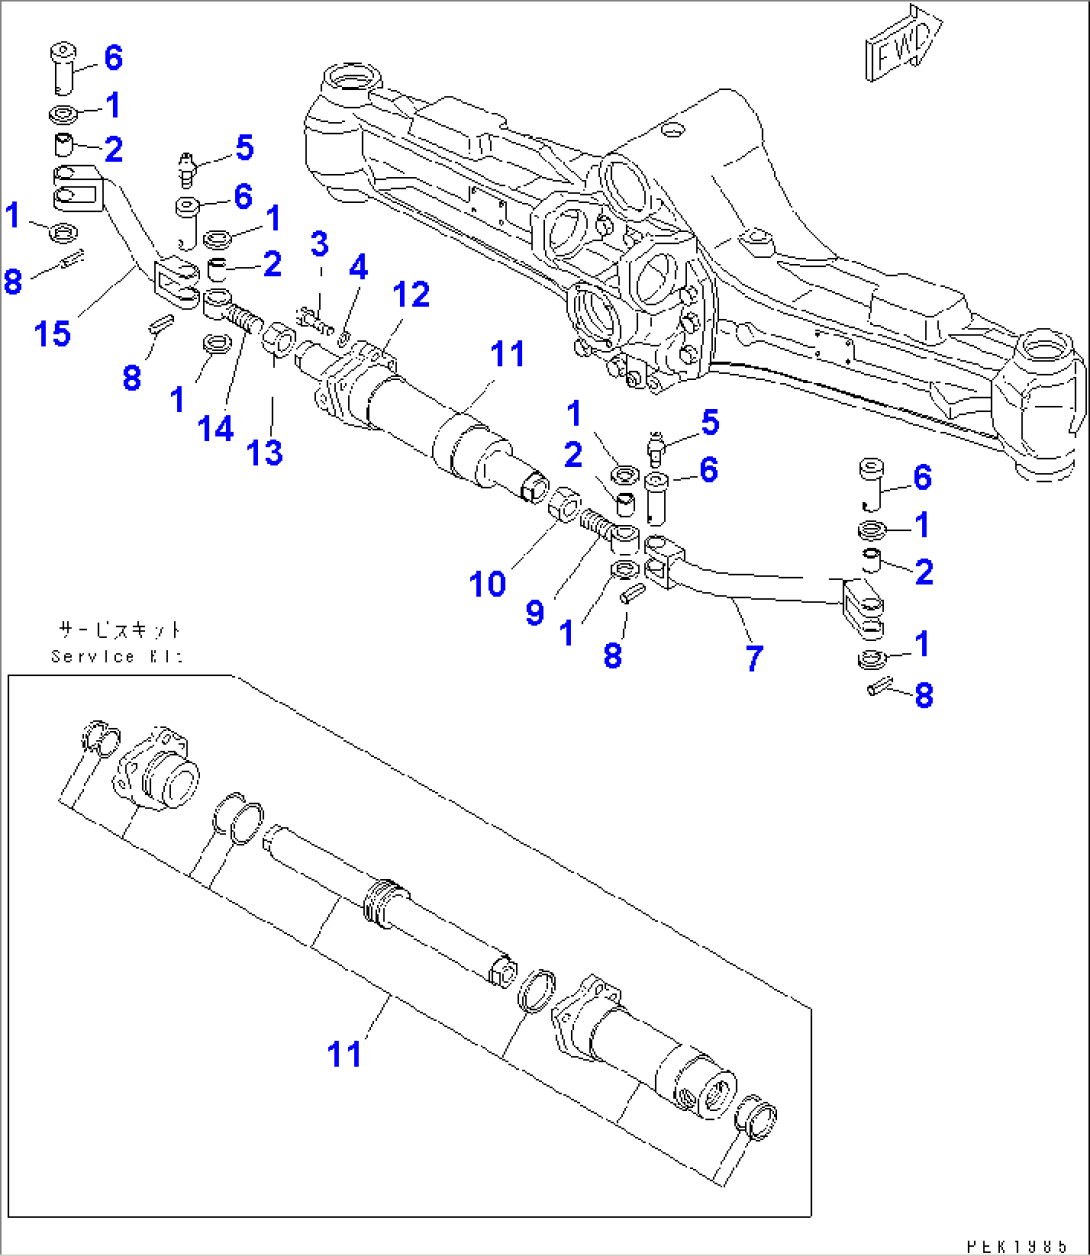 FRONT AXLE (STEERING CYLINDER AND TIE ROD)